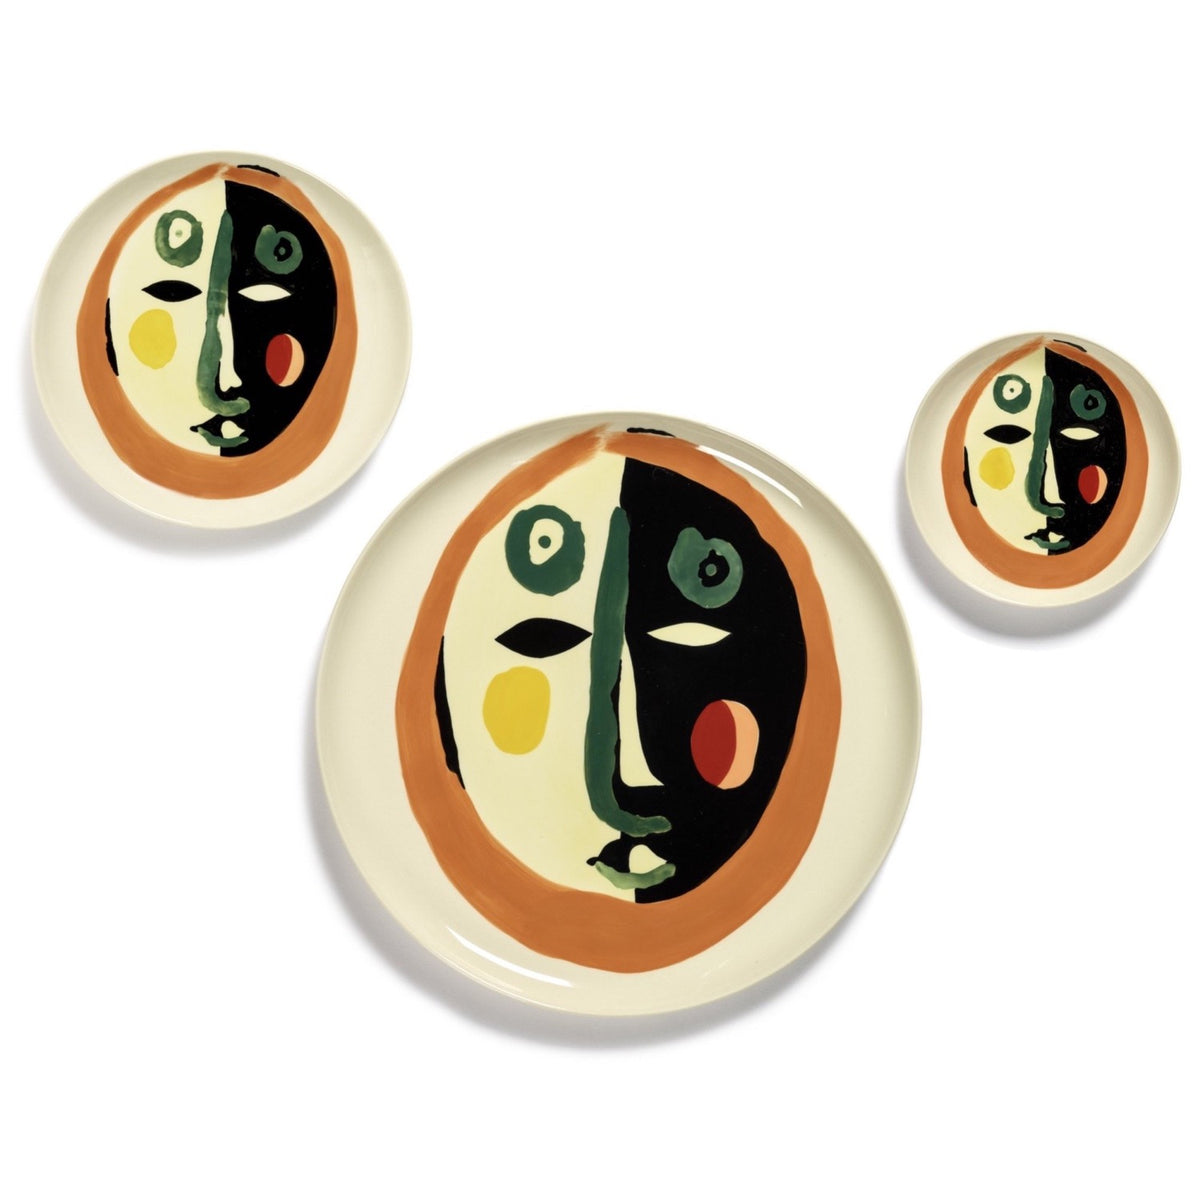 Ottolenghi for Serax Feast collection; extra small plate, with face 1 design.